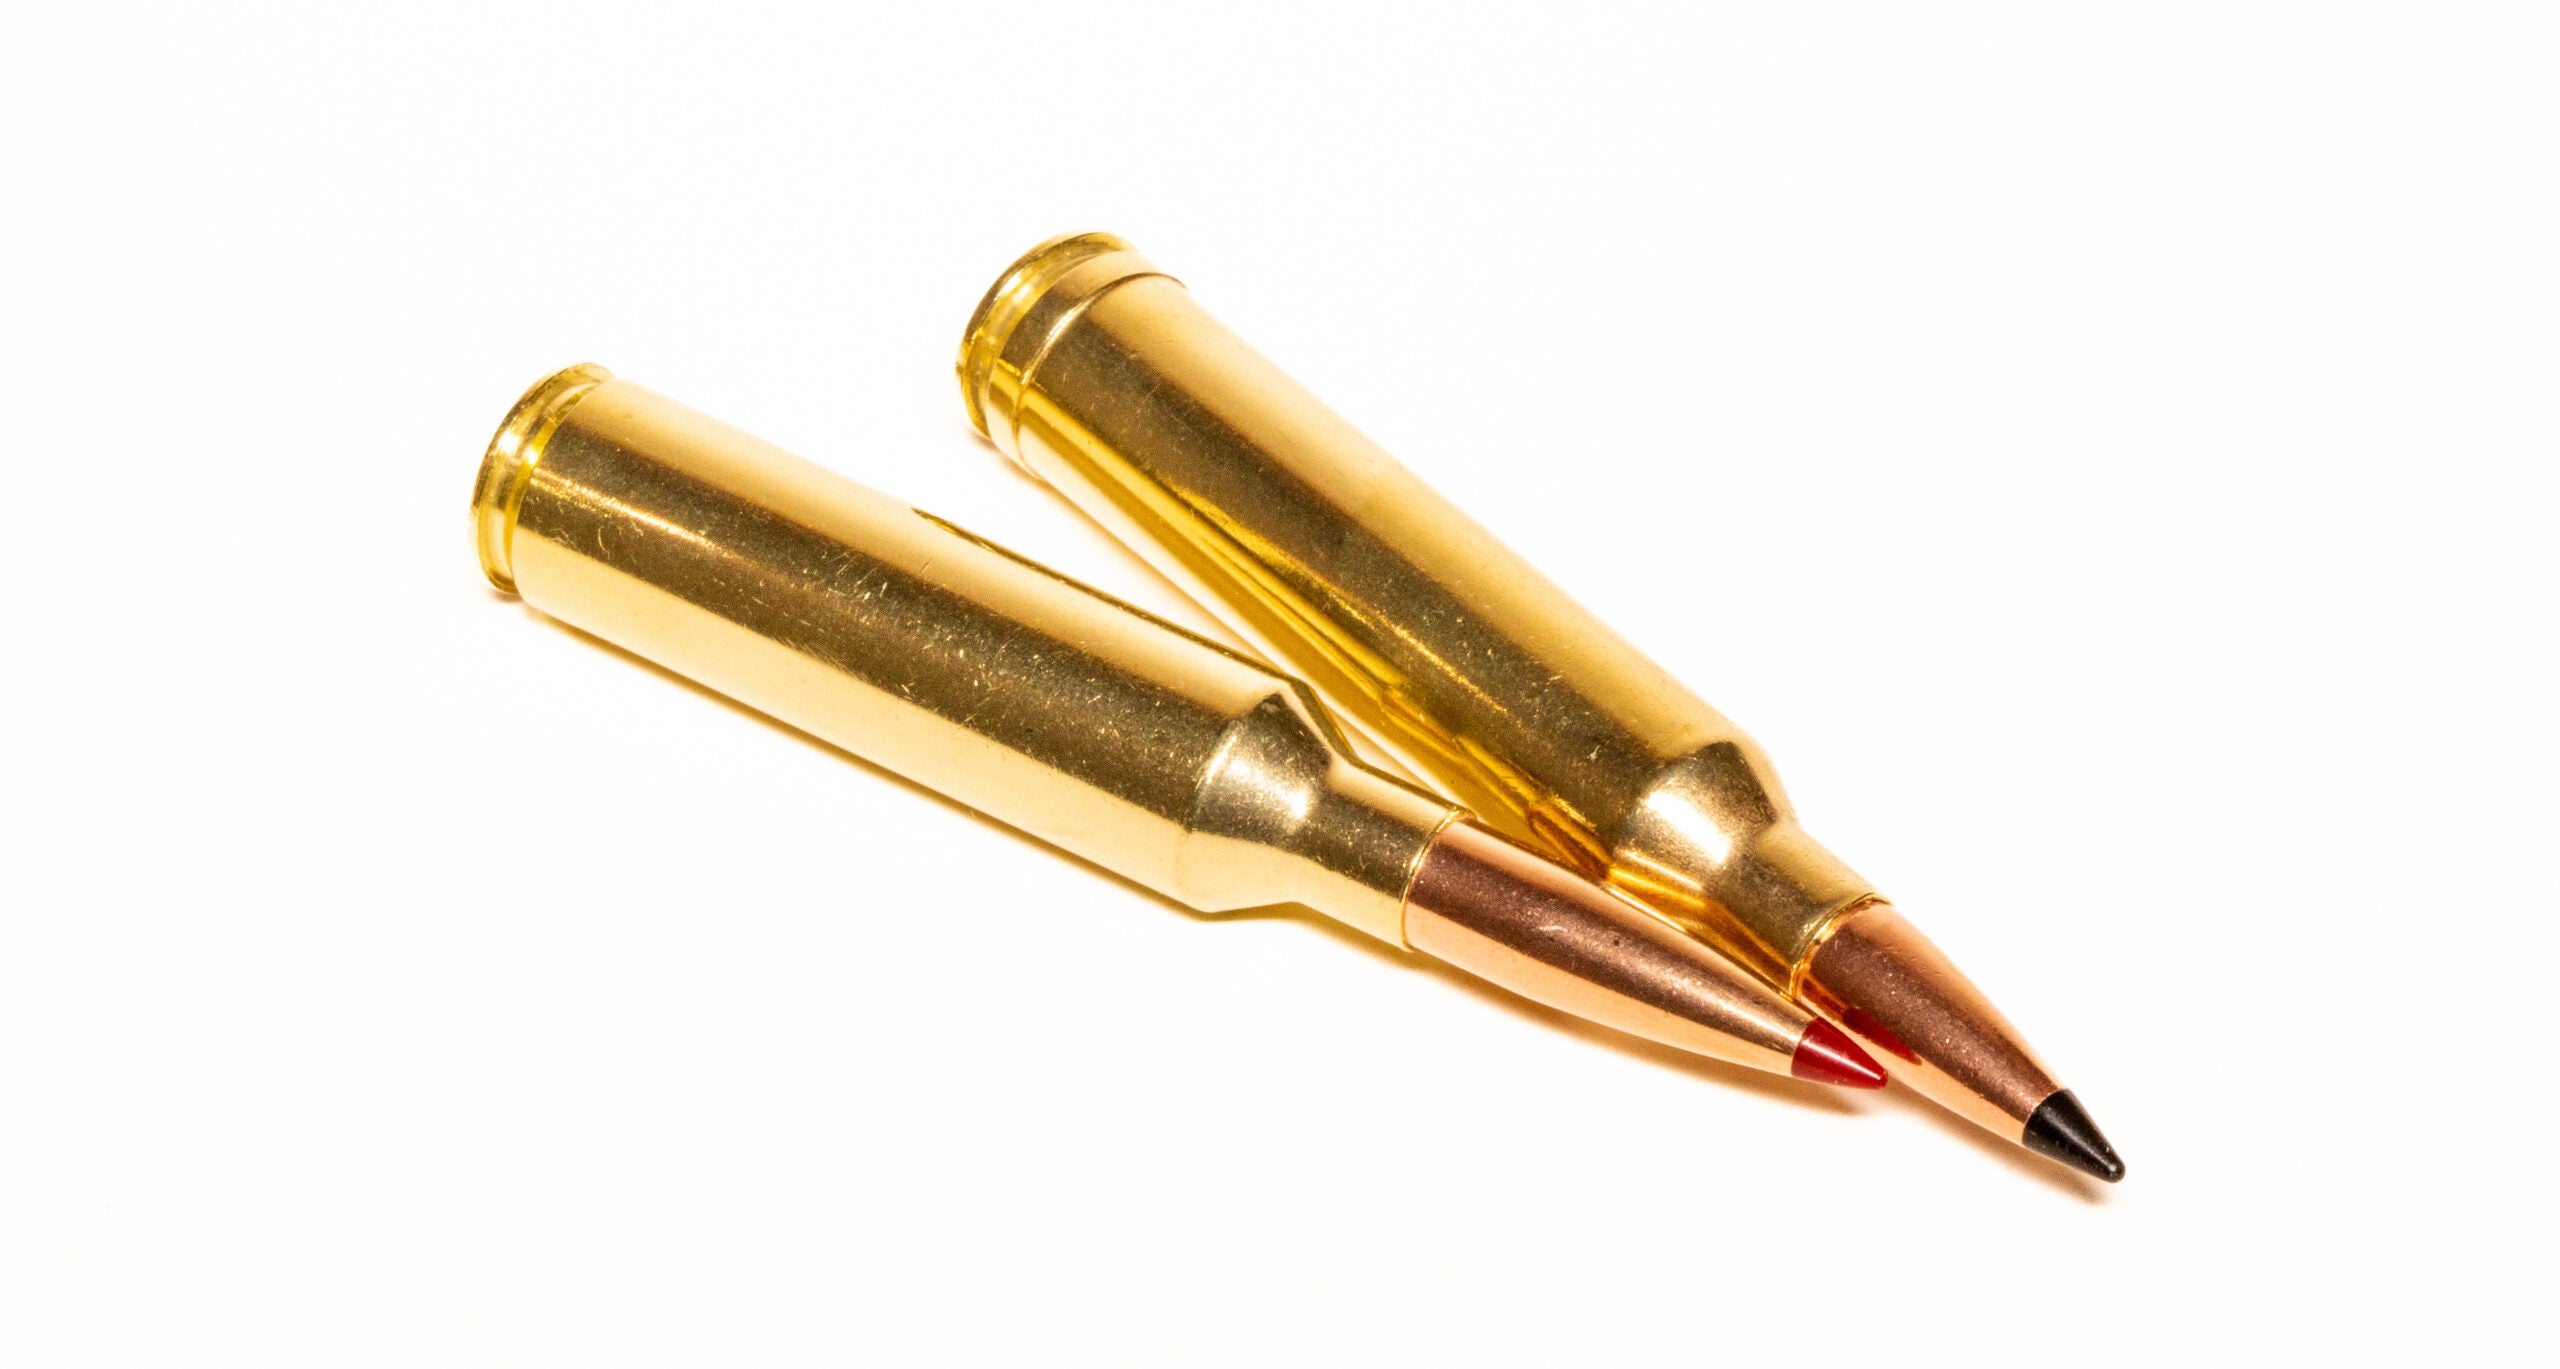 A 7 PRC cartridge and a 7mm Rem Mag cartridge lying next to each other on white background 